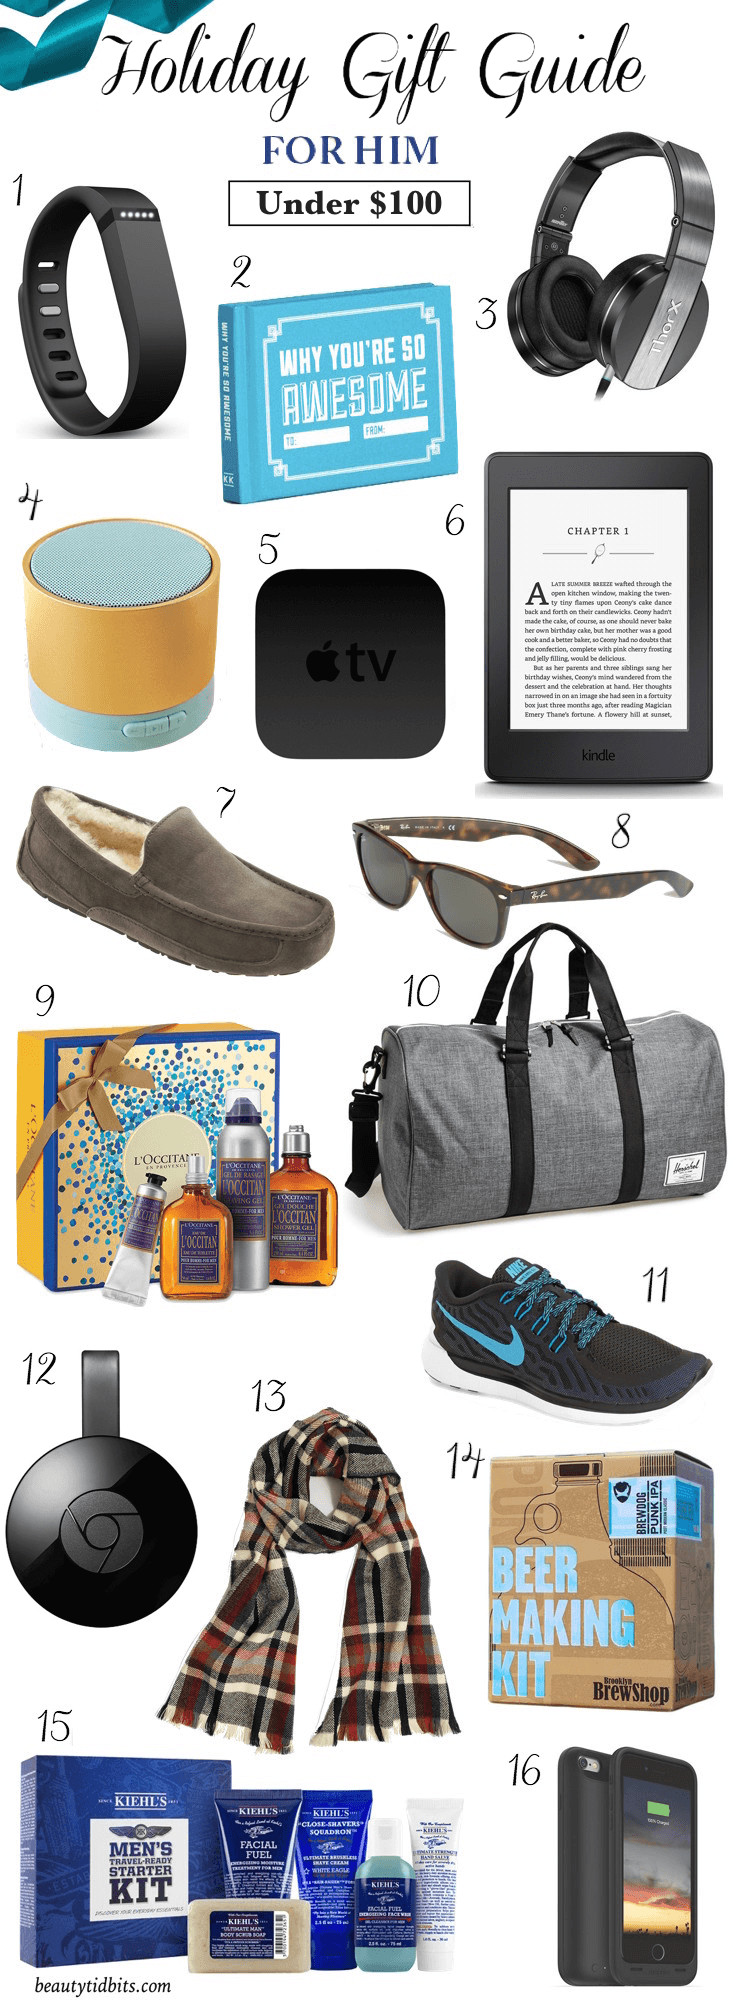 Holiday Gift Ideas For Men
 Holiday Gifts Your Man Will Love and Actually Use